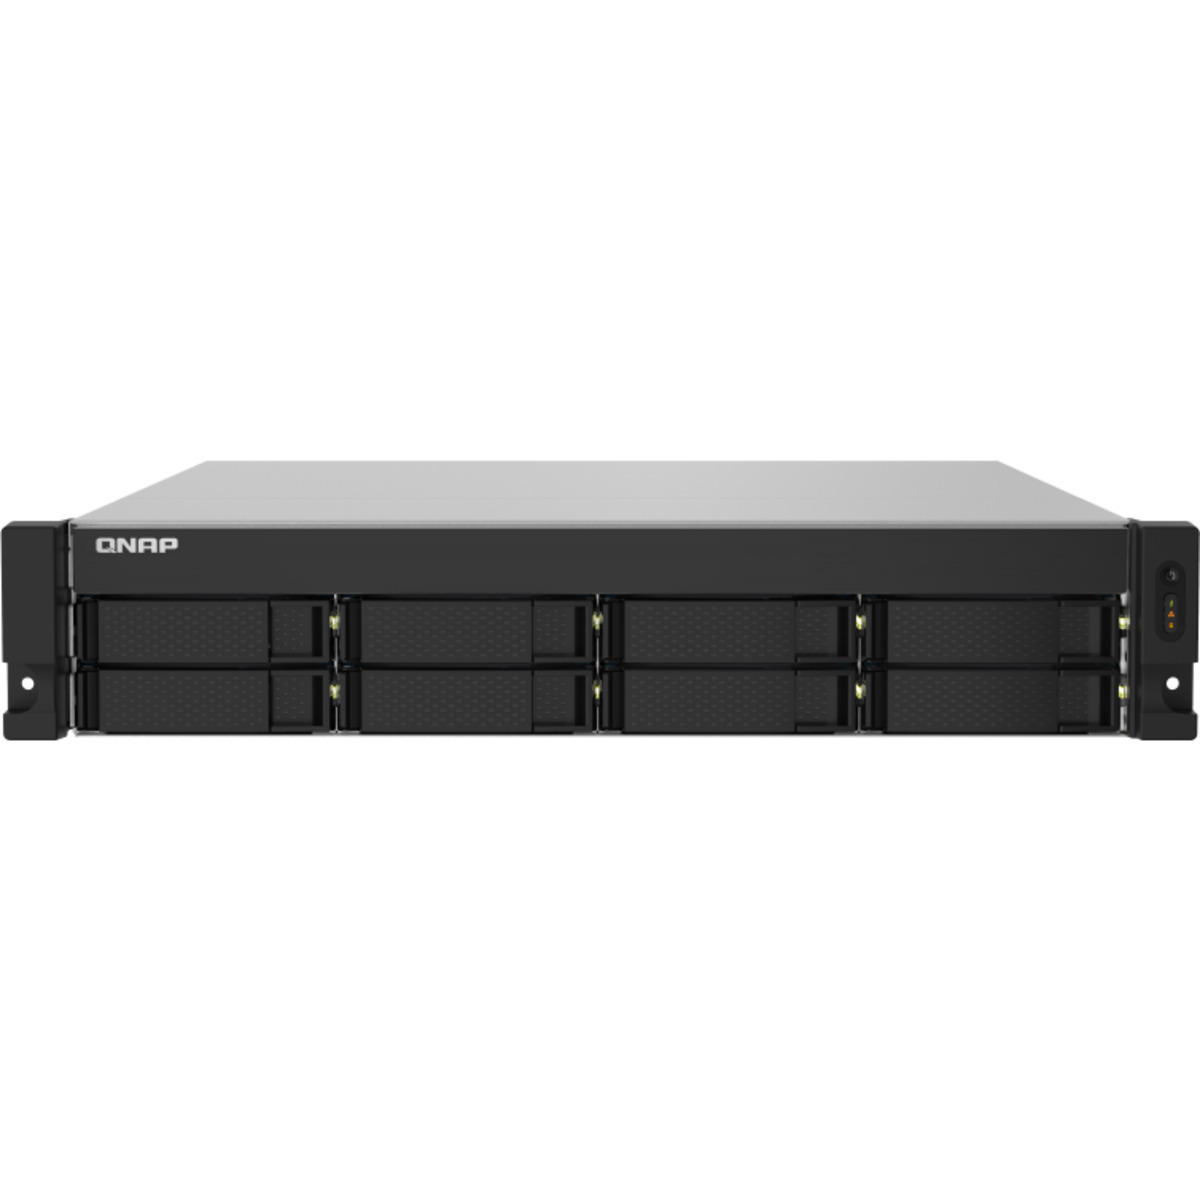 buy $5804 QNAP TS-832PXU-RP 176tb RackMount NAS - Network Attached Storage Device 8x22000gb Seagate IronWolf Pro ST22000NT001 3.5 7200rpm SATA 6Gb/s HDD NAS Class Drives Installed - Burn-In Tested - FREE RAM UPGRADE - nas headquarters buy network attached storage server device das new raid-5 free shipping simply usa TS-832PXU-RP